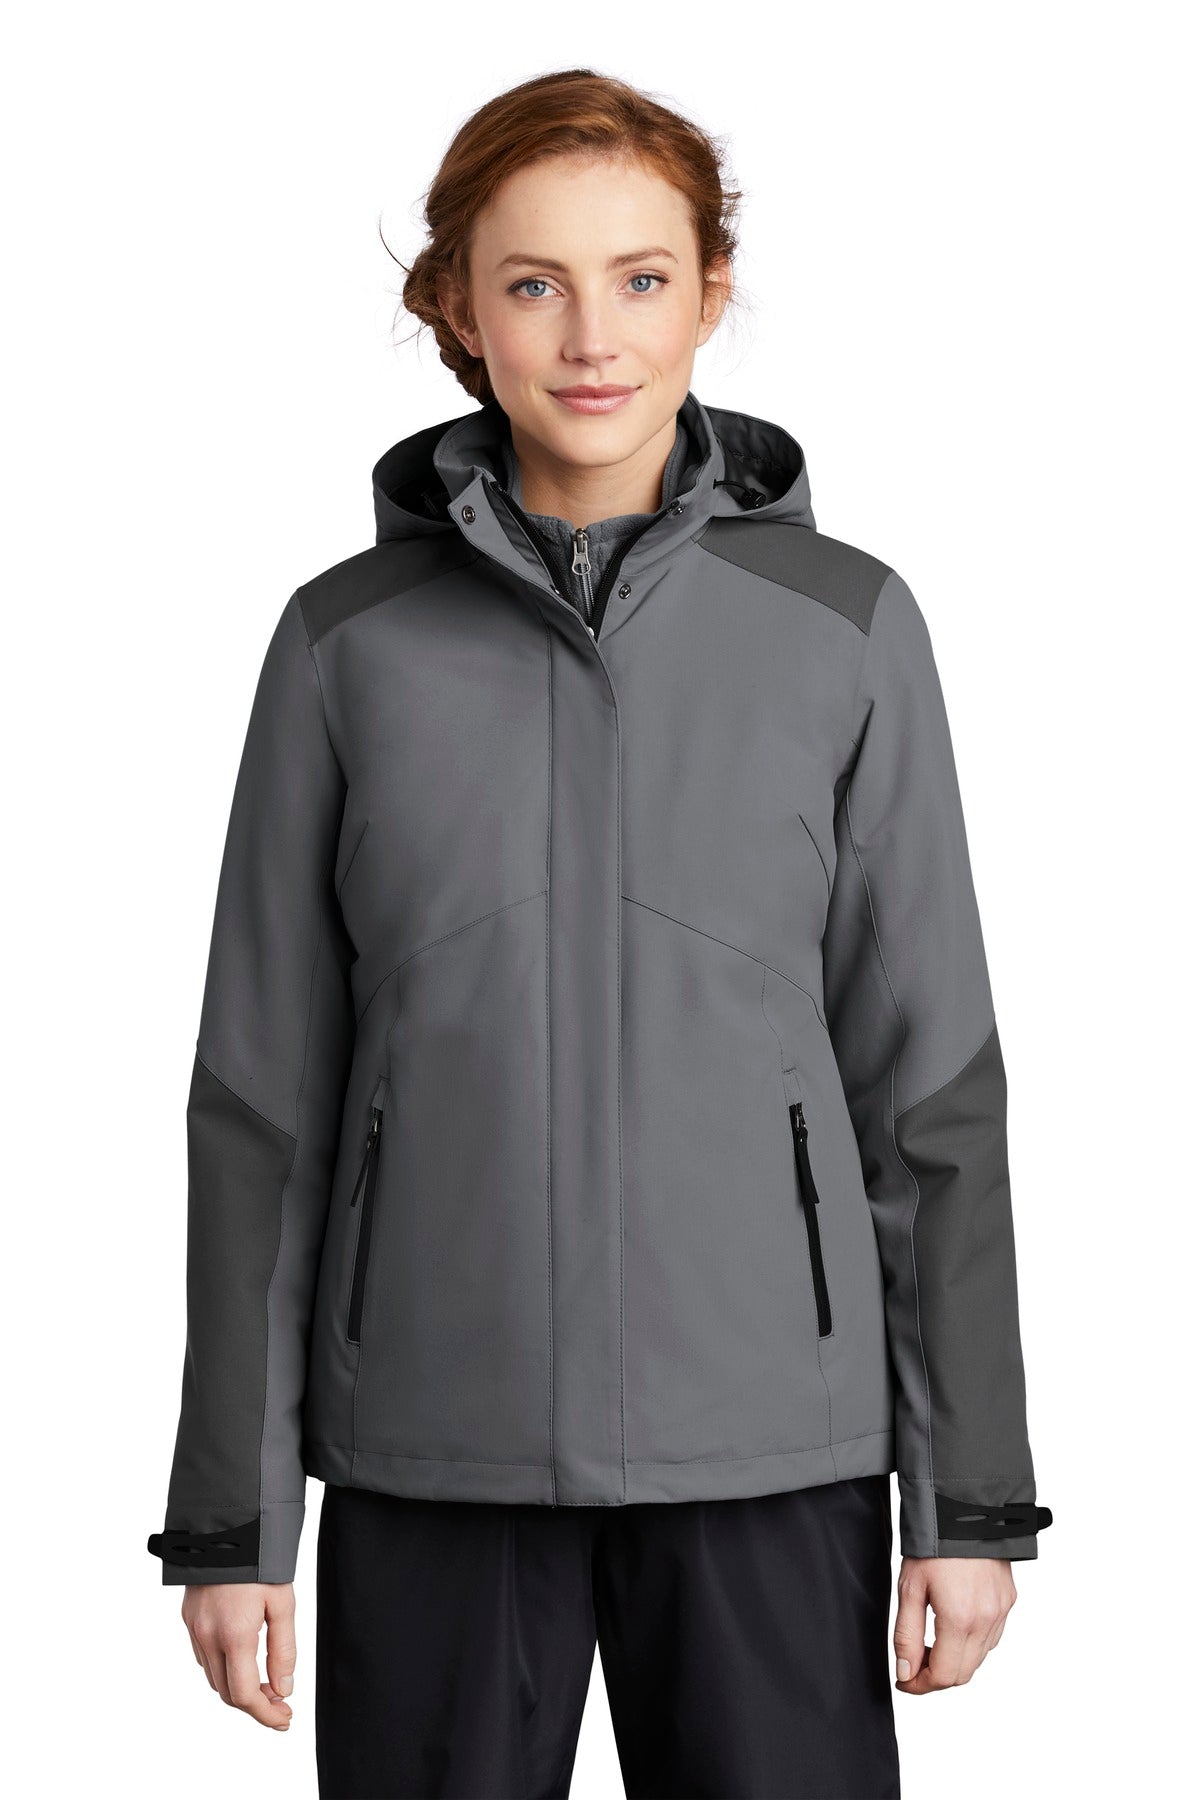 Port Authority Ladies Insulated Waterproof Tech Jacket L405